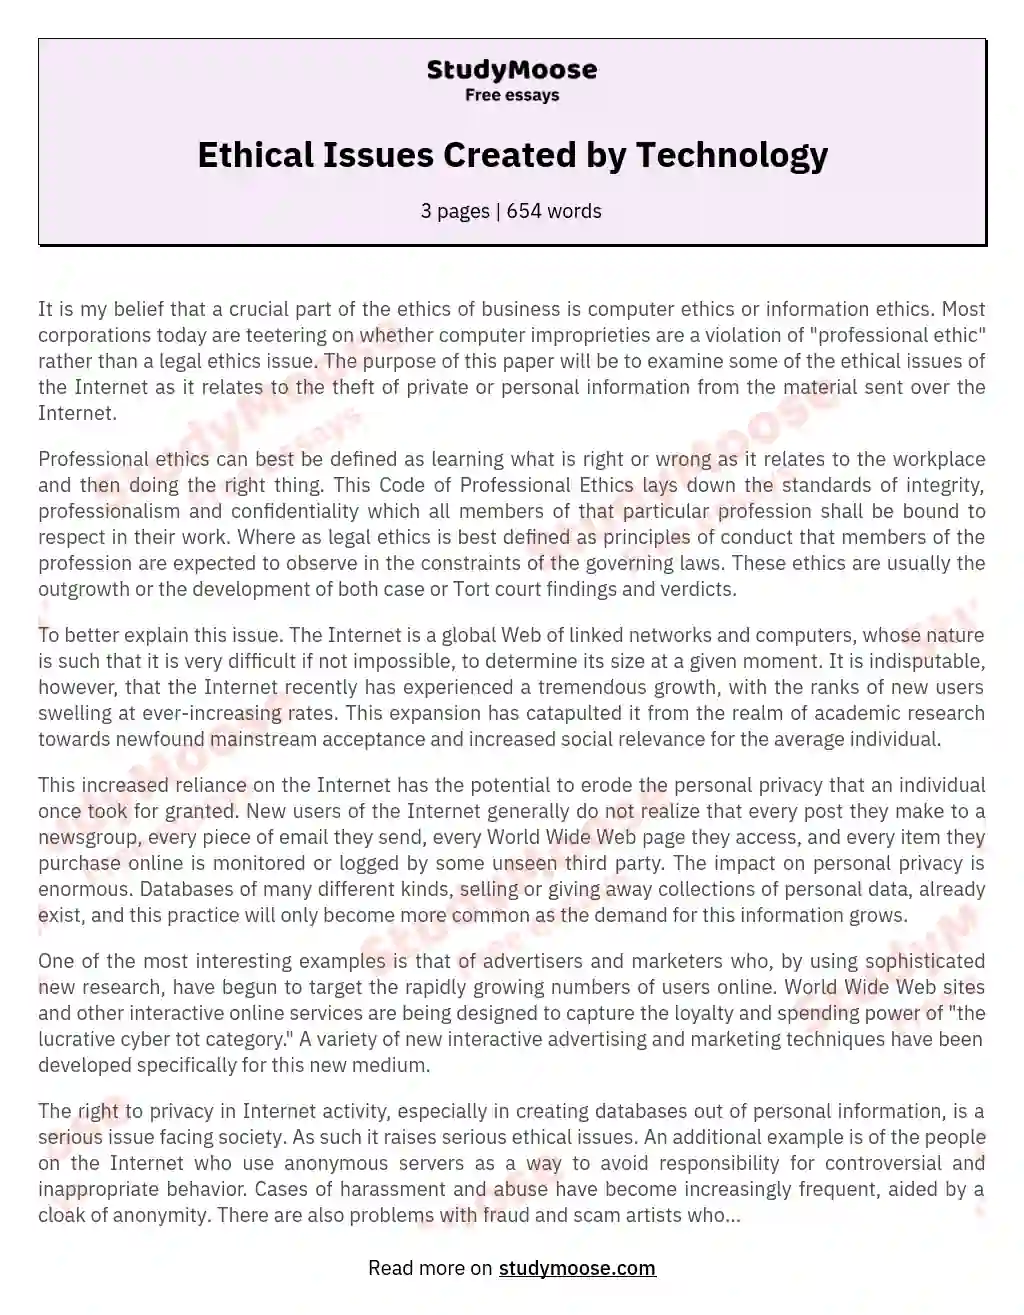 Ethical Issues Created by Technology essay